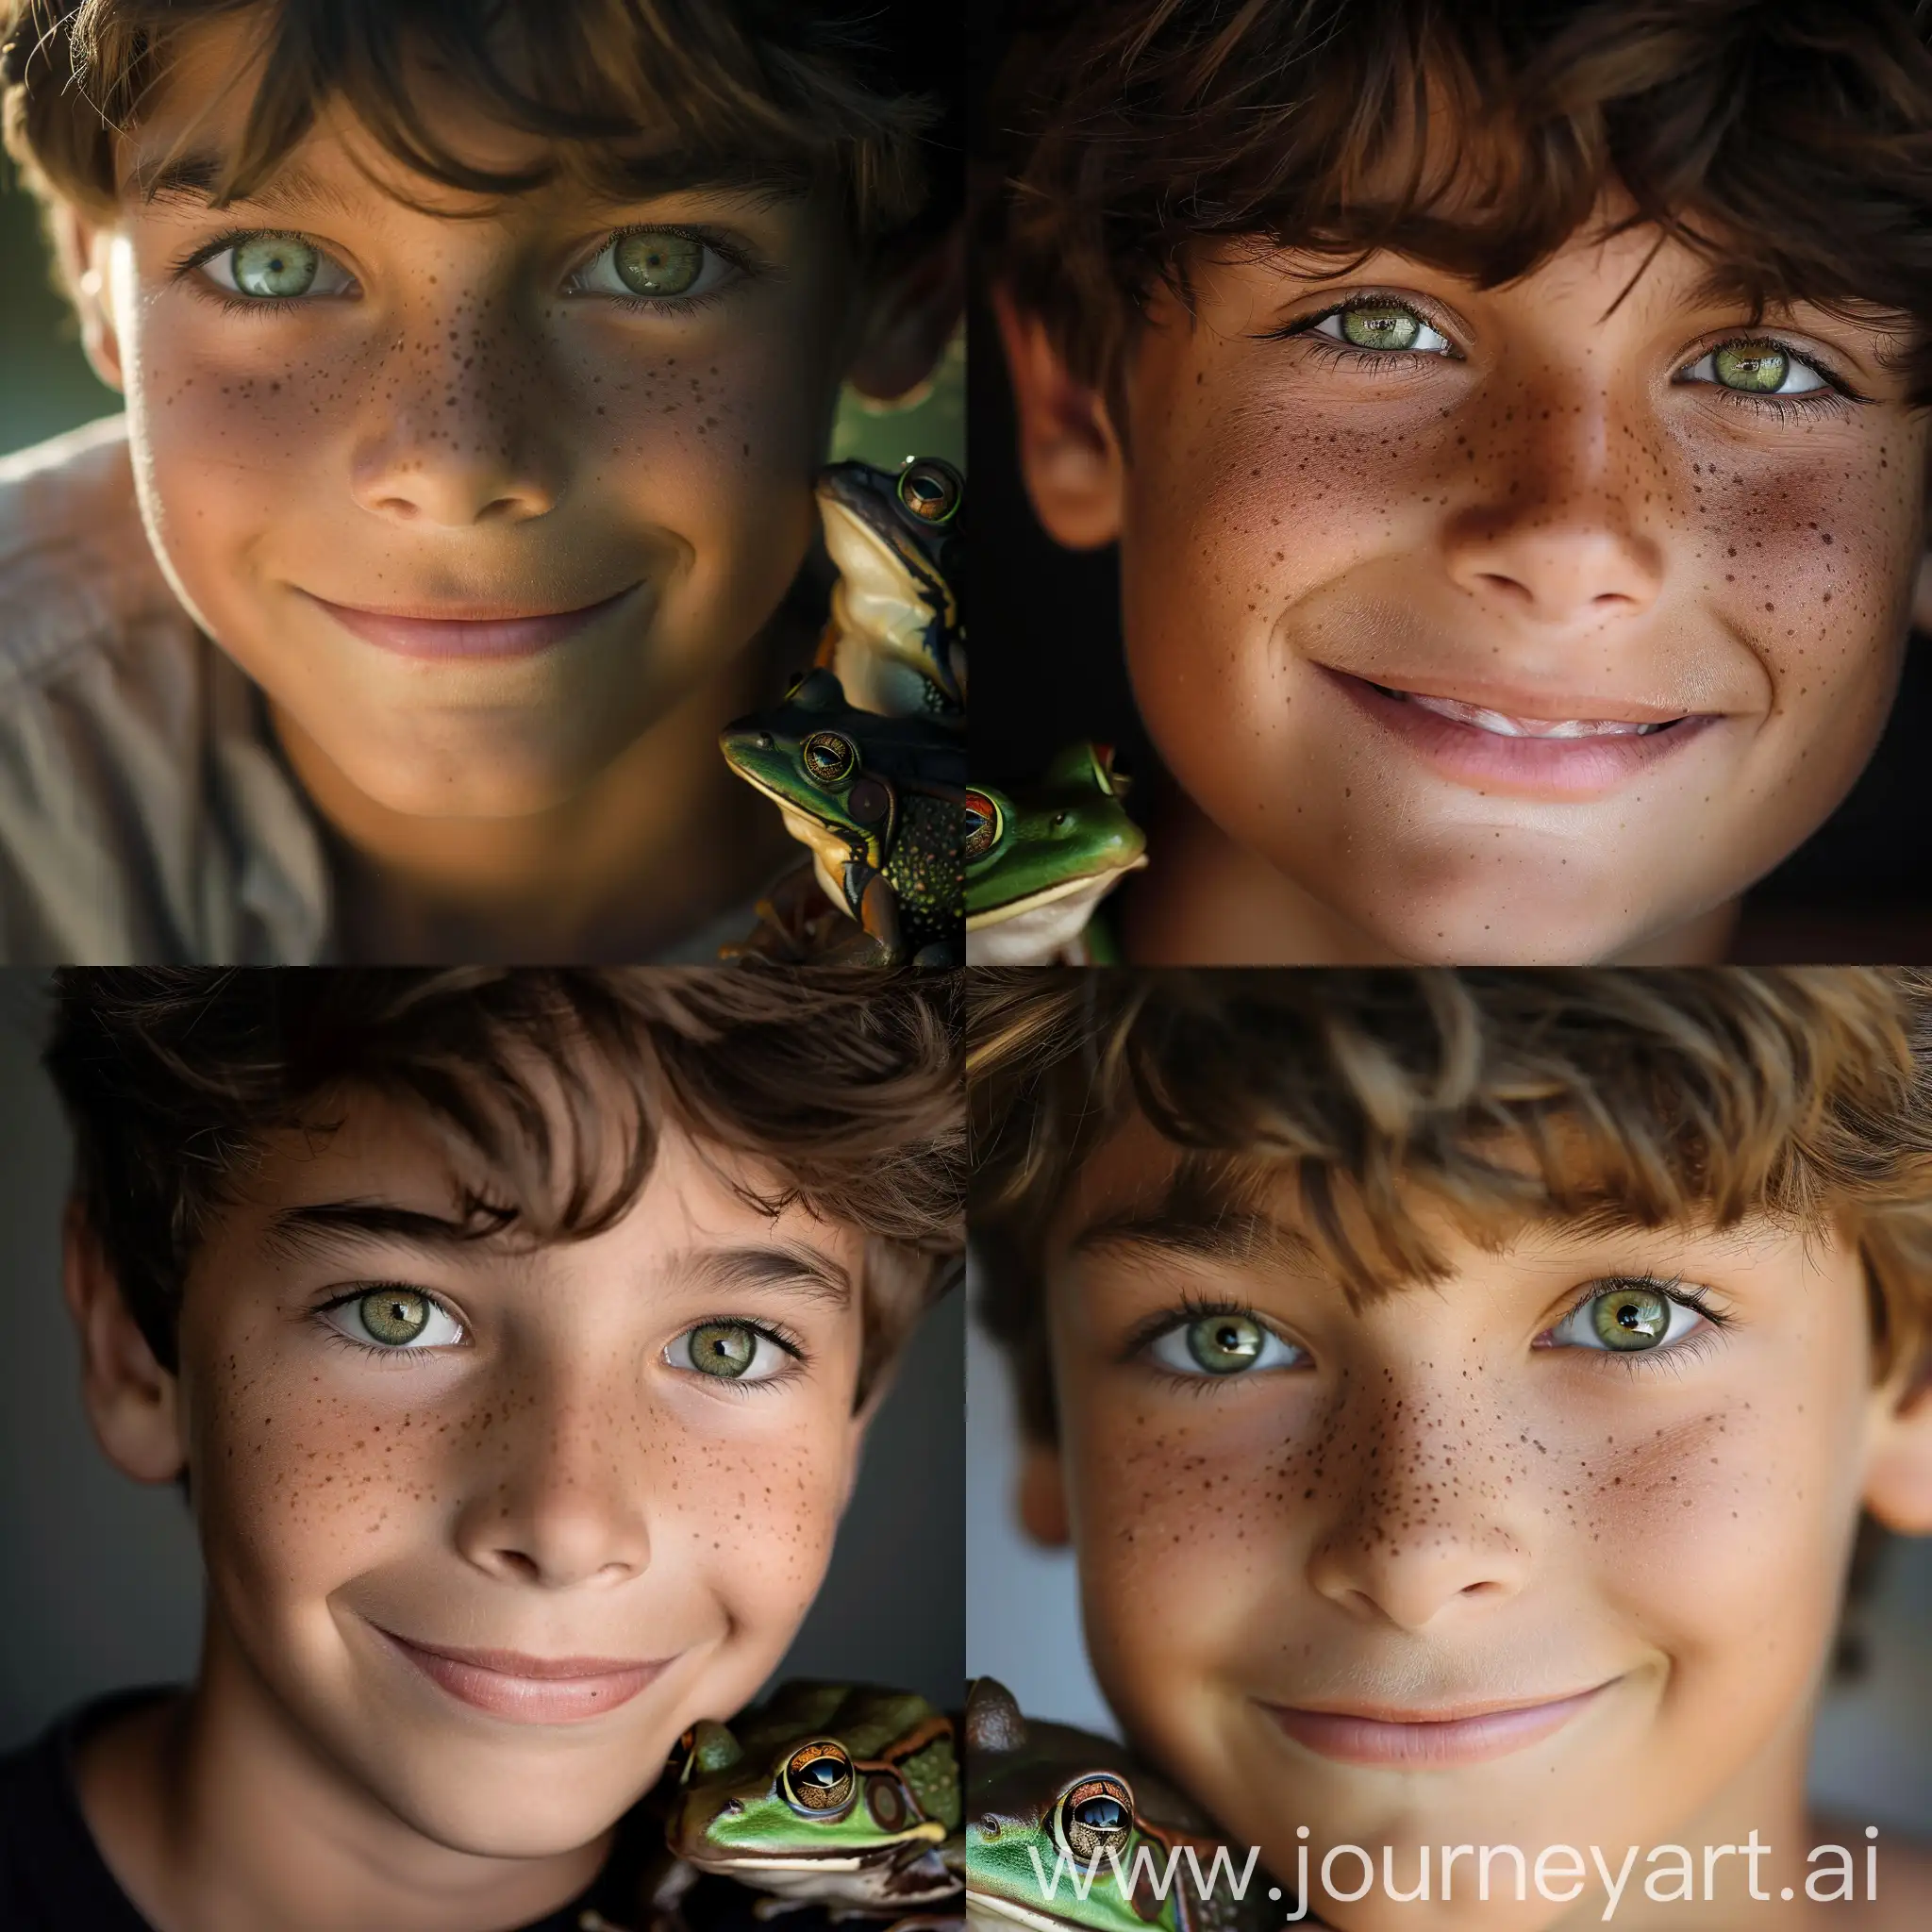 Cheerful-Teenage-Boy-Portrait-with-Bright-Green-Eyes-and-Friendly-Frog-Companion